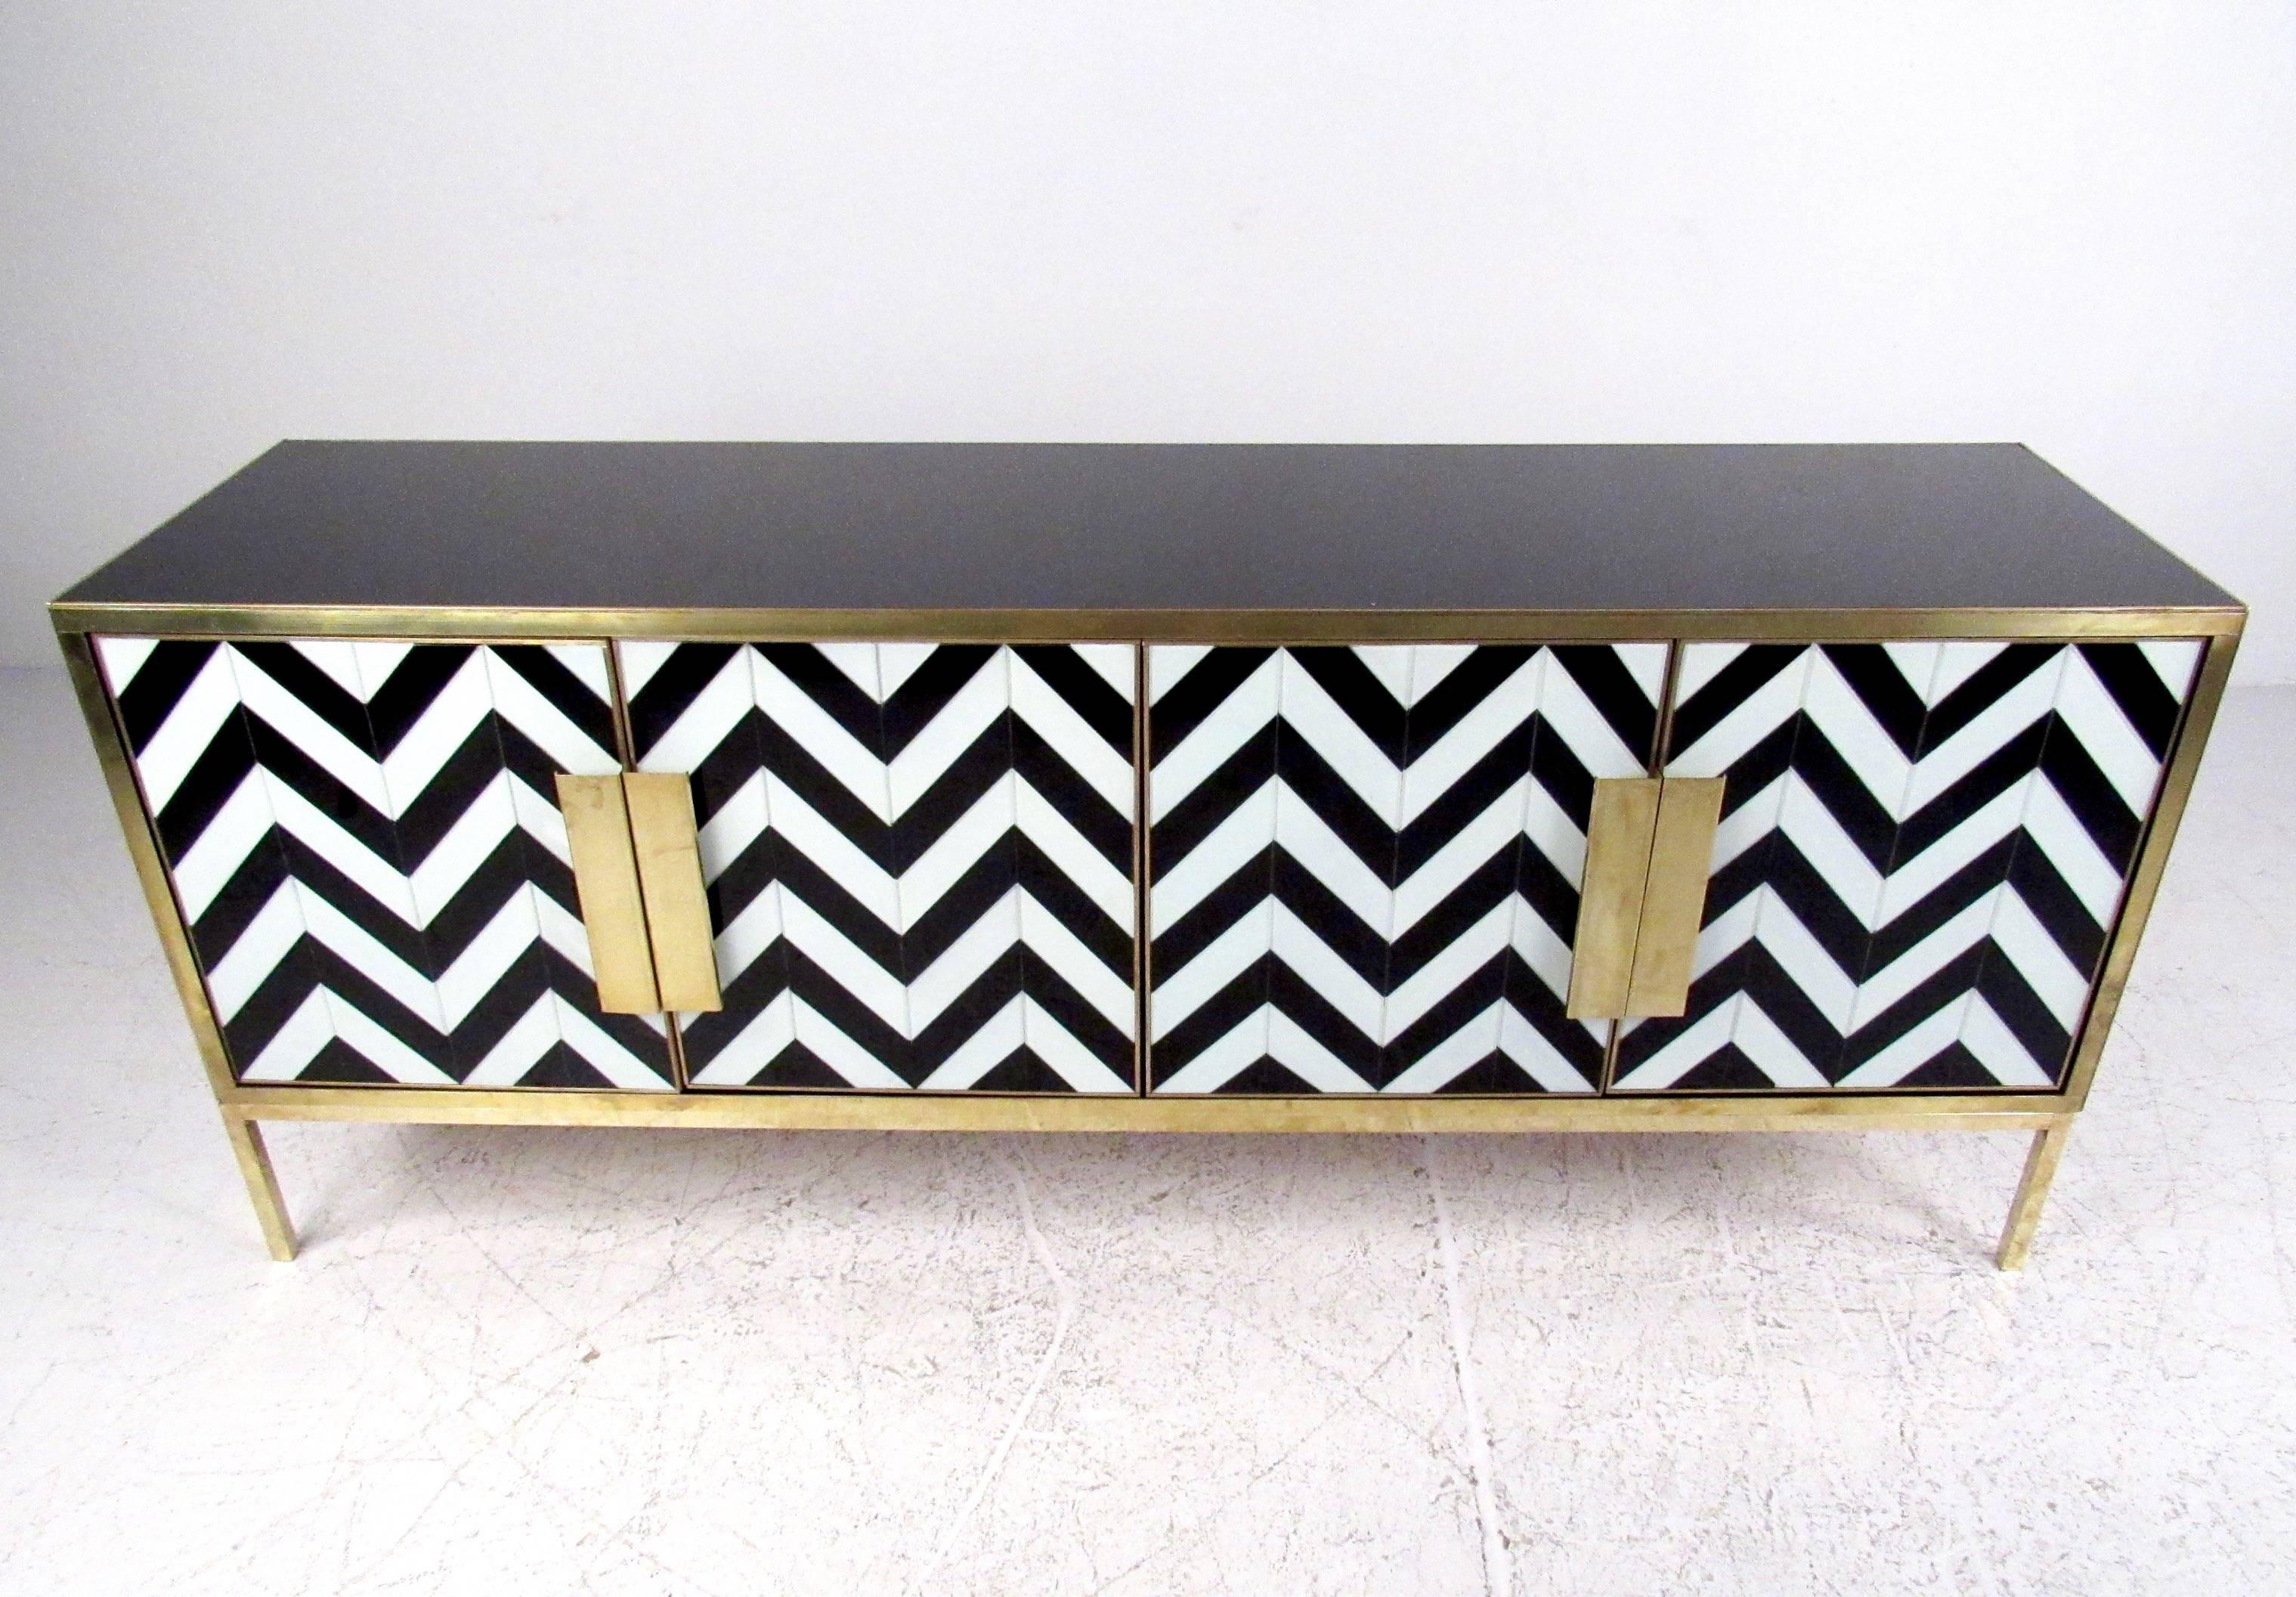 This Mid-Century Modern credenza features a unique Herringbone pattern underneath glass finish, with a painted black top/sides covered similarly in glass. The eye-catching black and white pattern is wonderfully accented by brass trim, legs, and